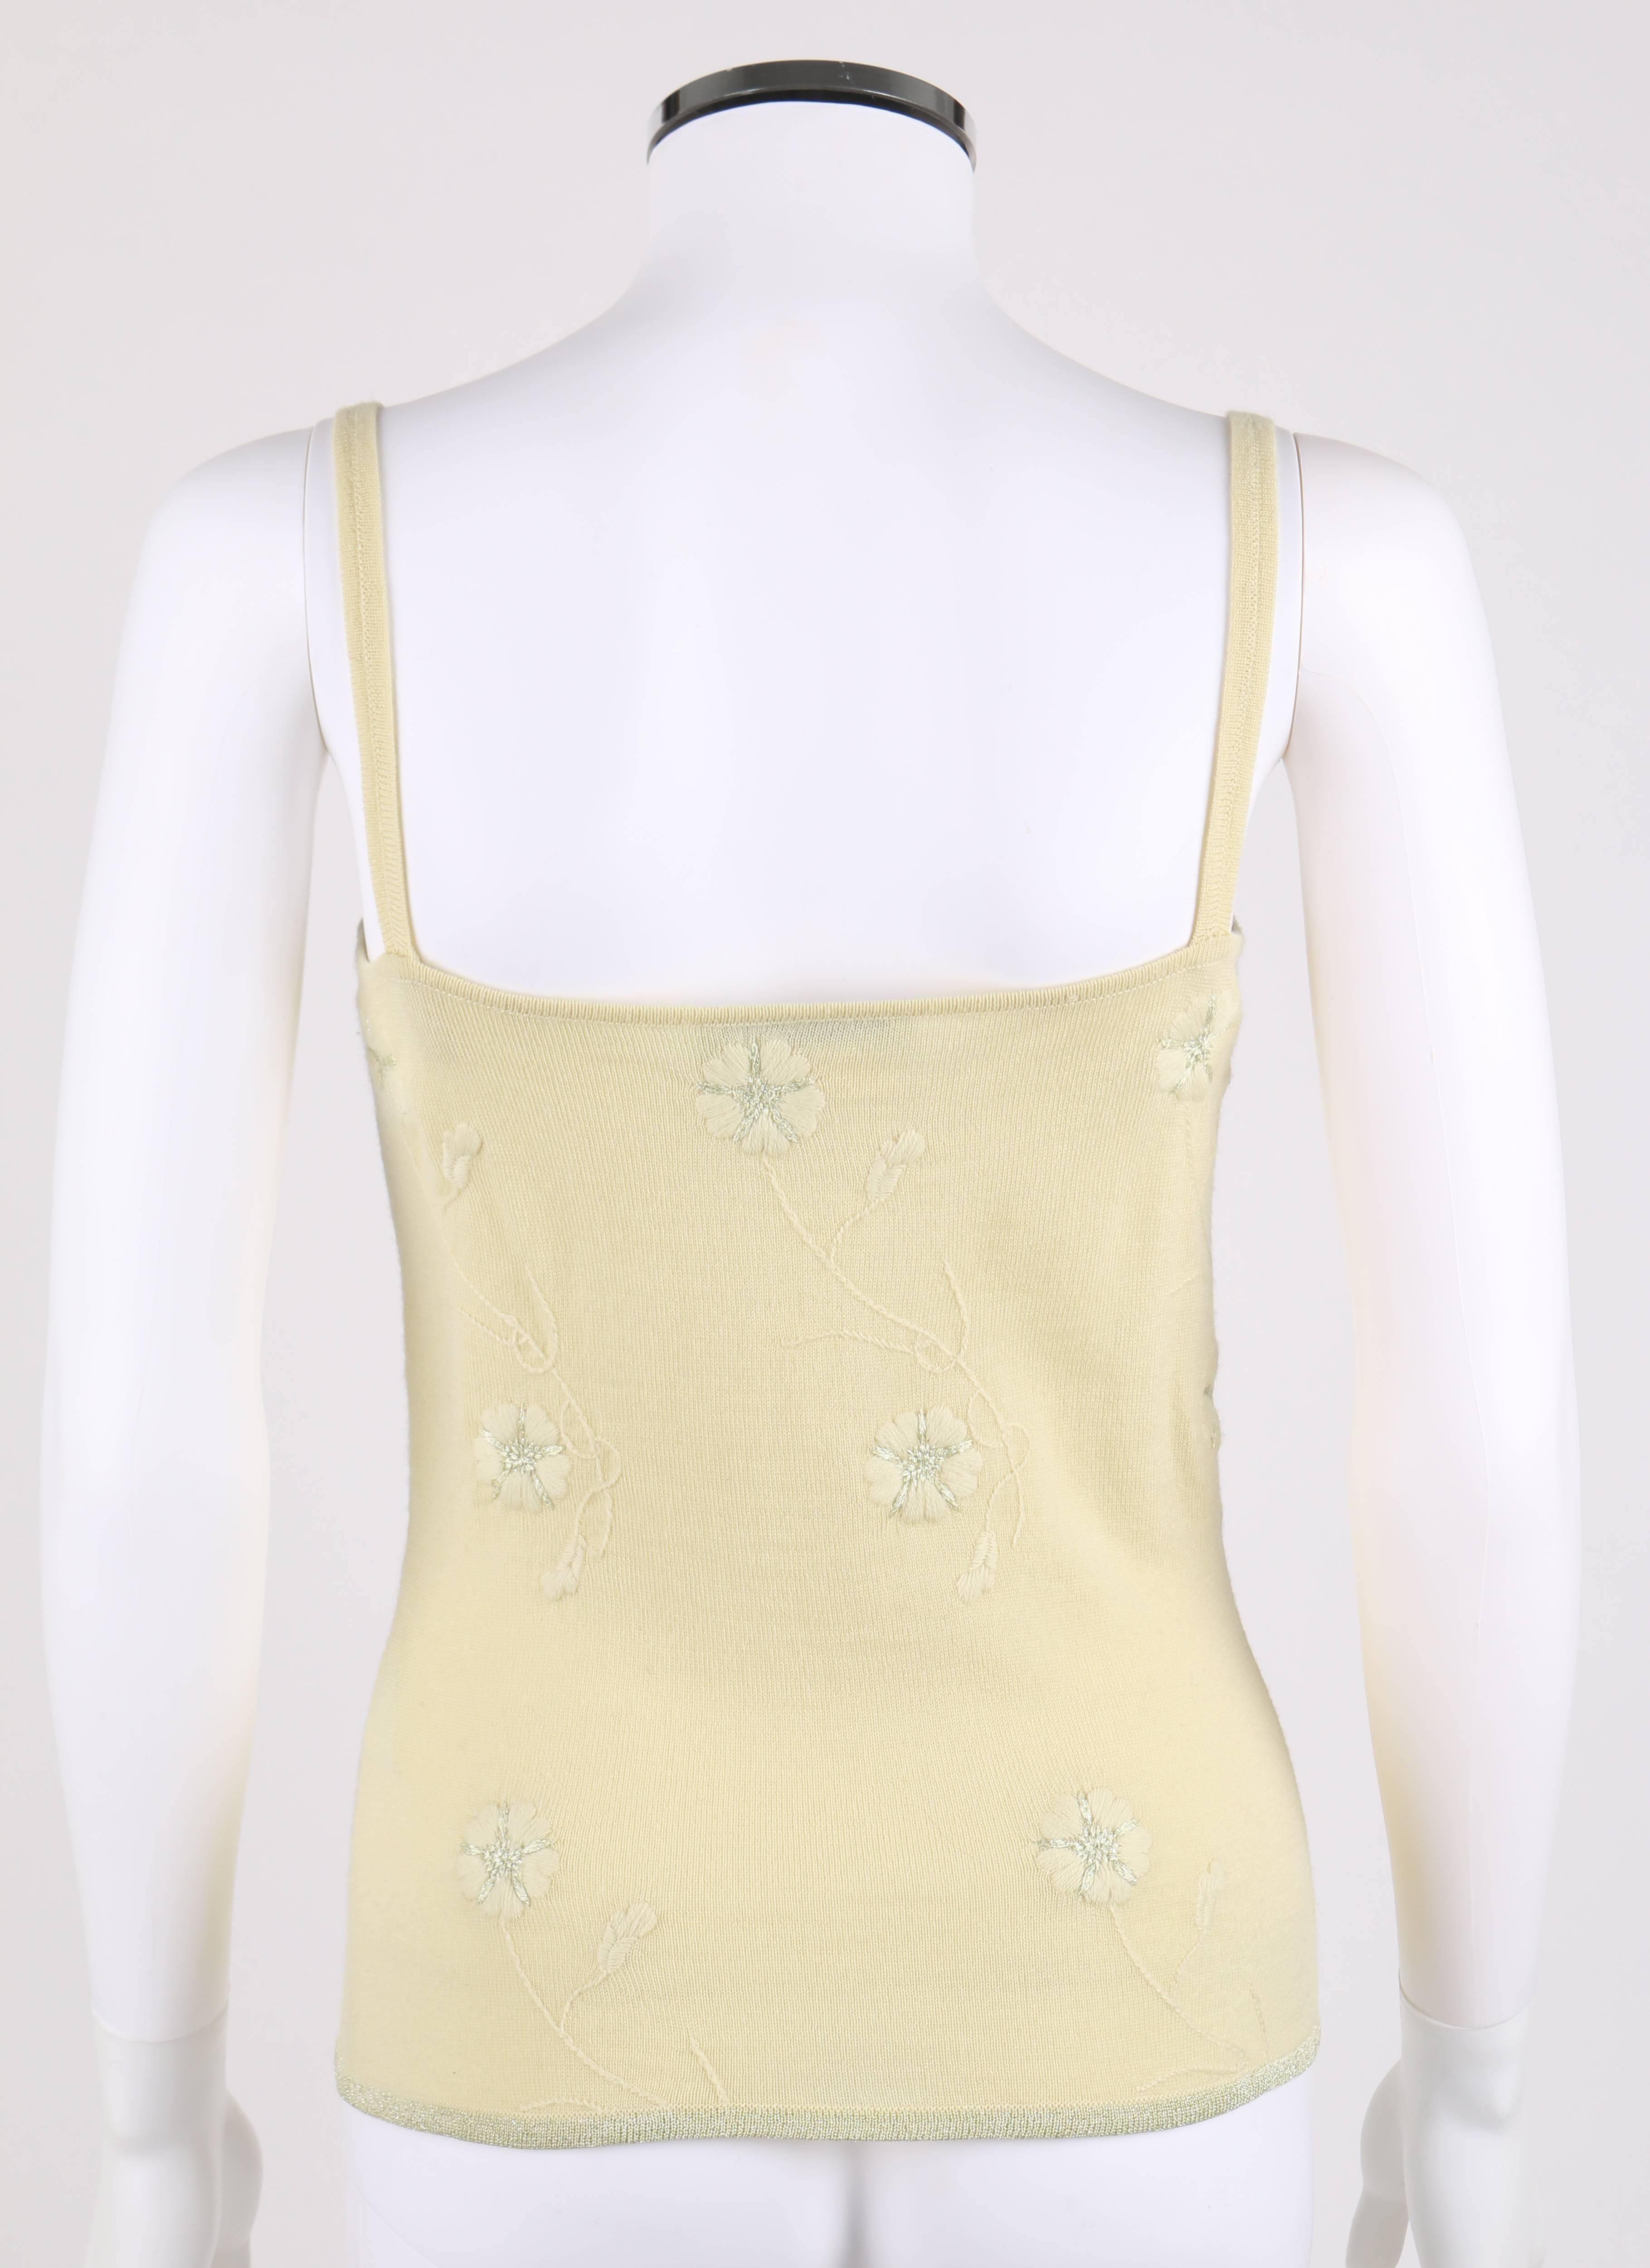 GIVENCHY Couture S/S 1998 ALEXANDER MCQUEEN Pale Yellow Floral Cardigan Top Set For Sale 2